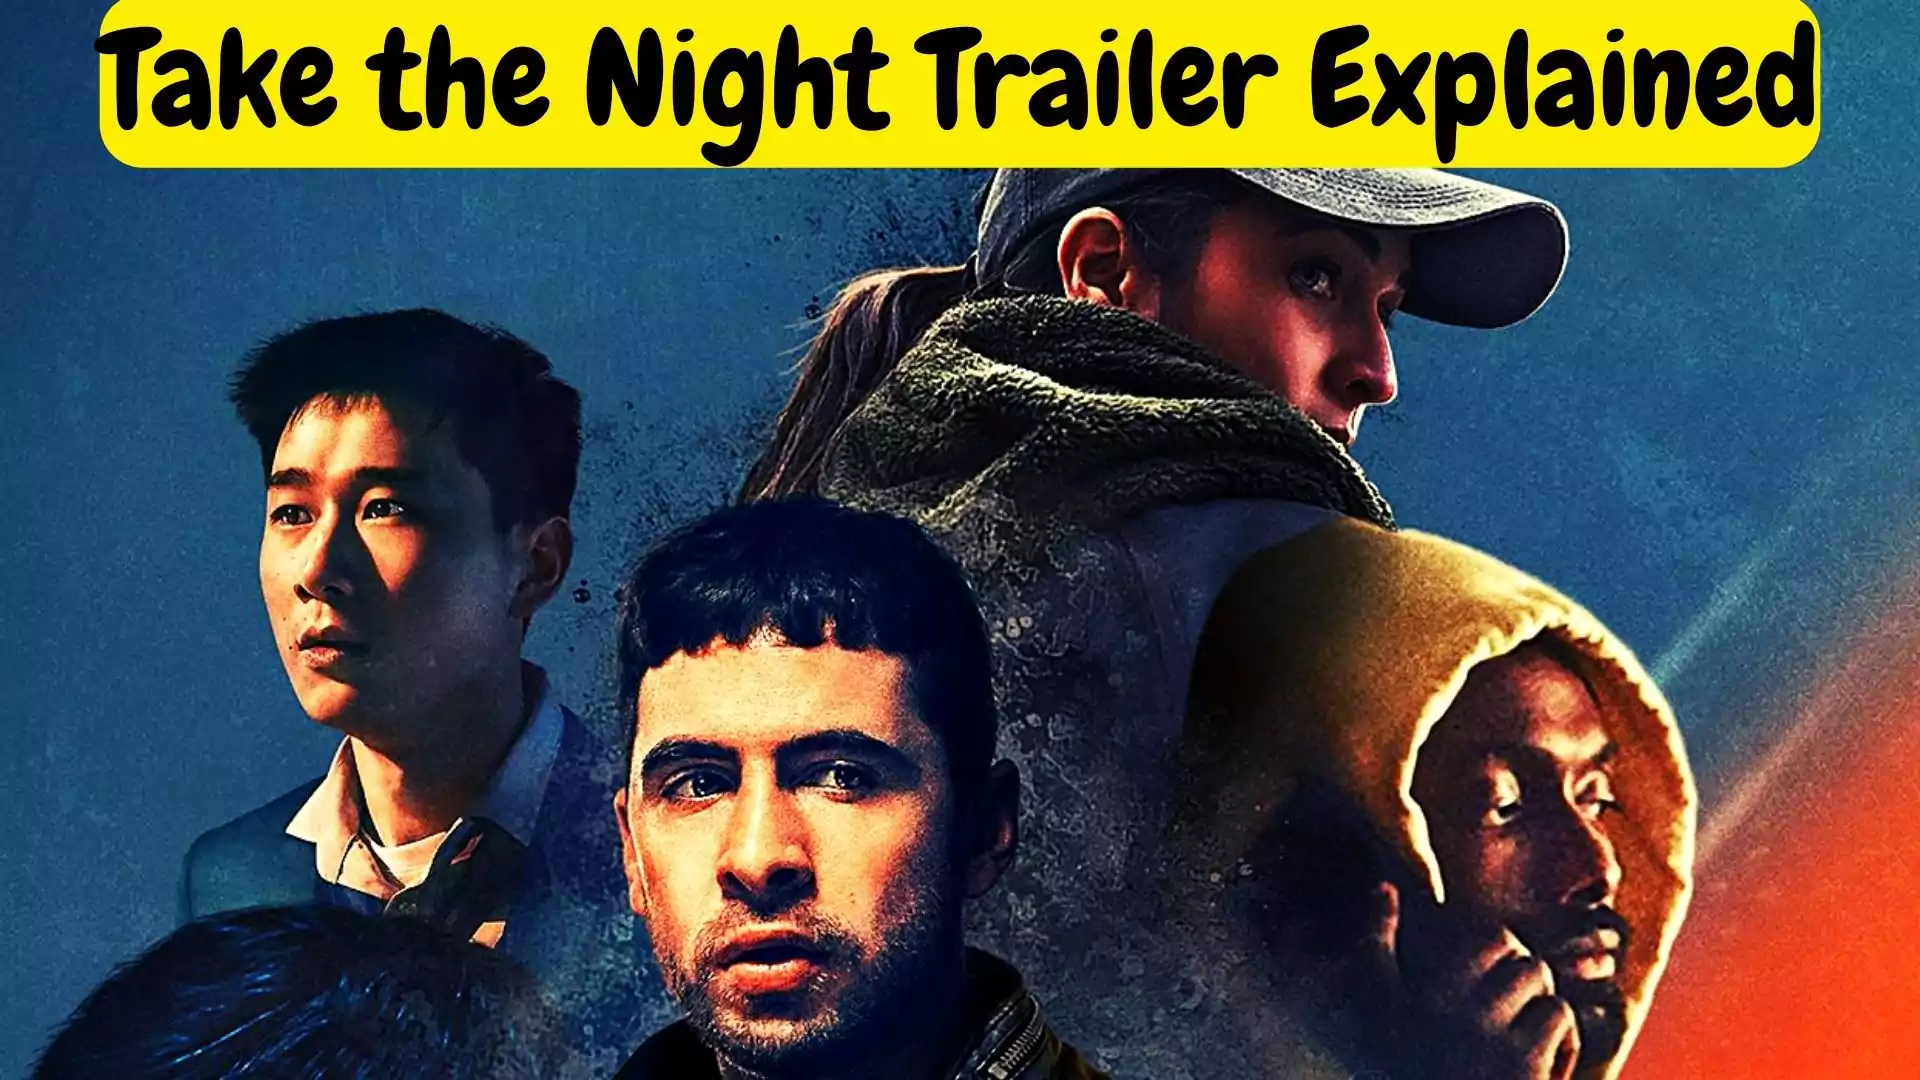 Take the Night Trailer Explained